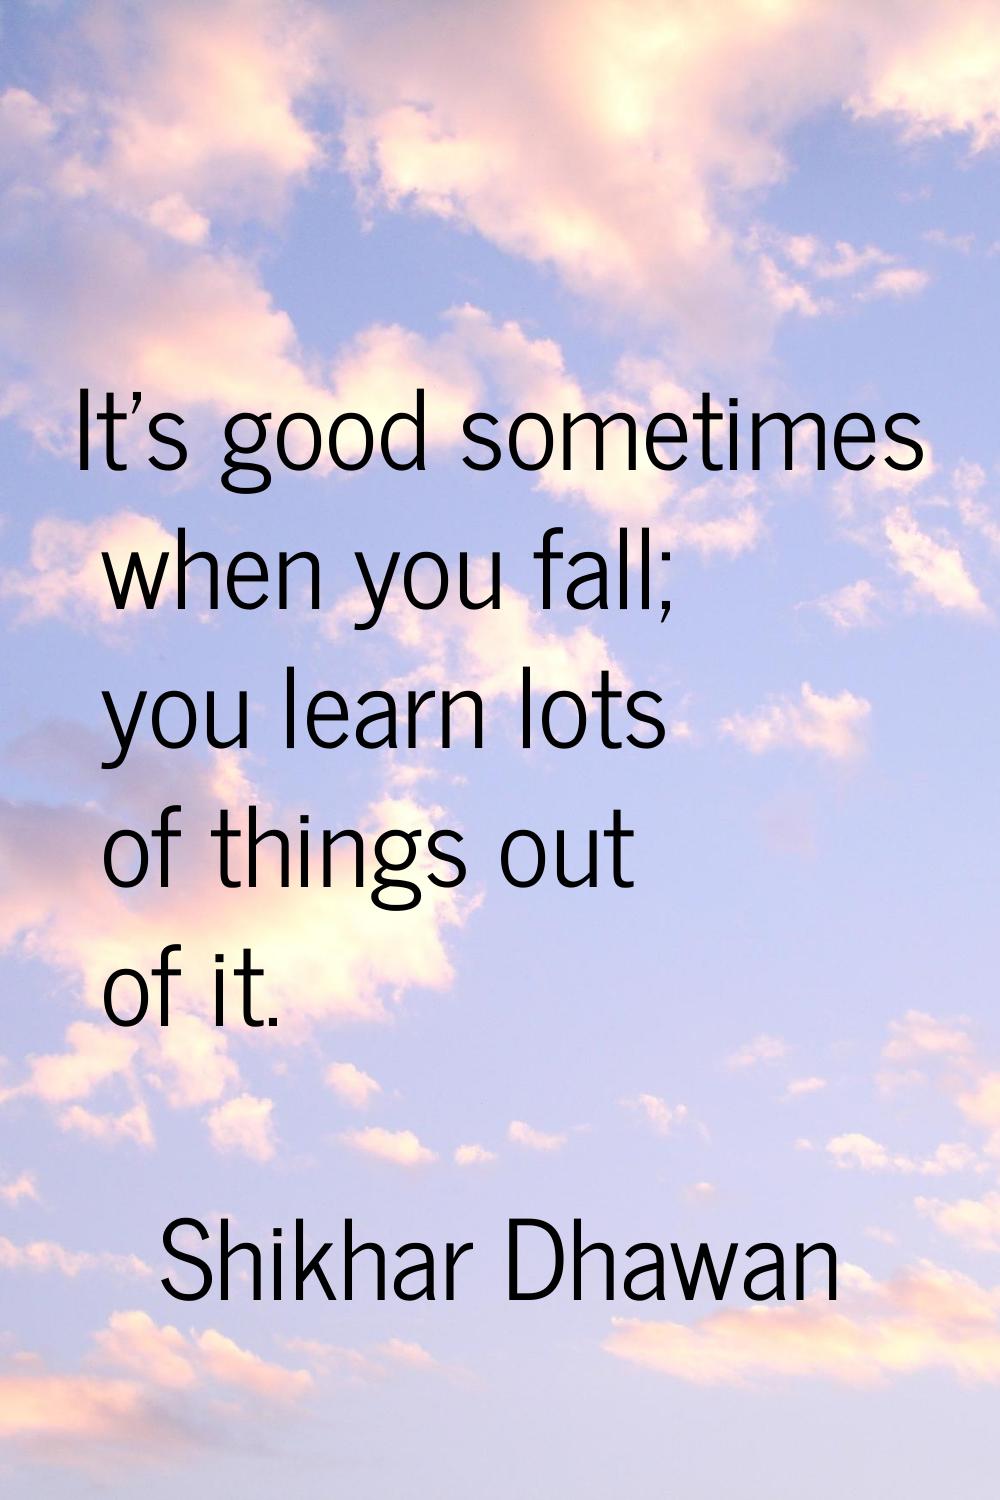 It's good sometimes when you fall; you learn lots of things out of it.